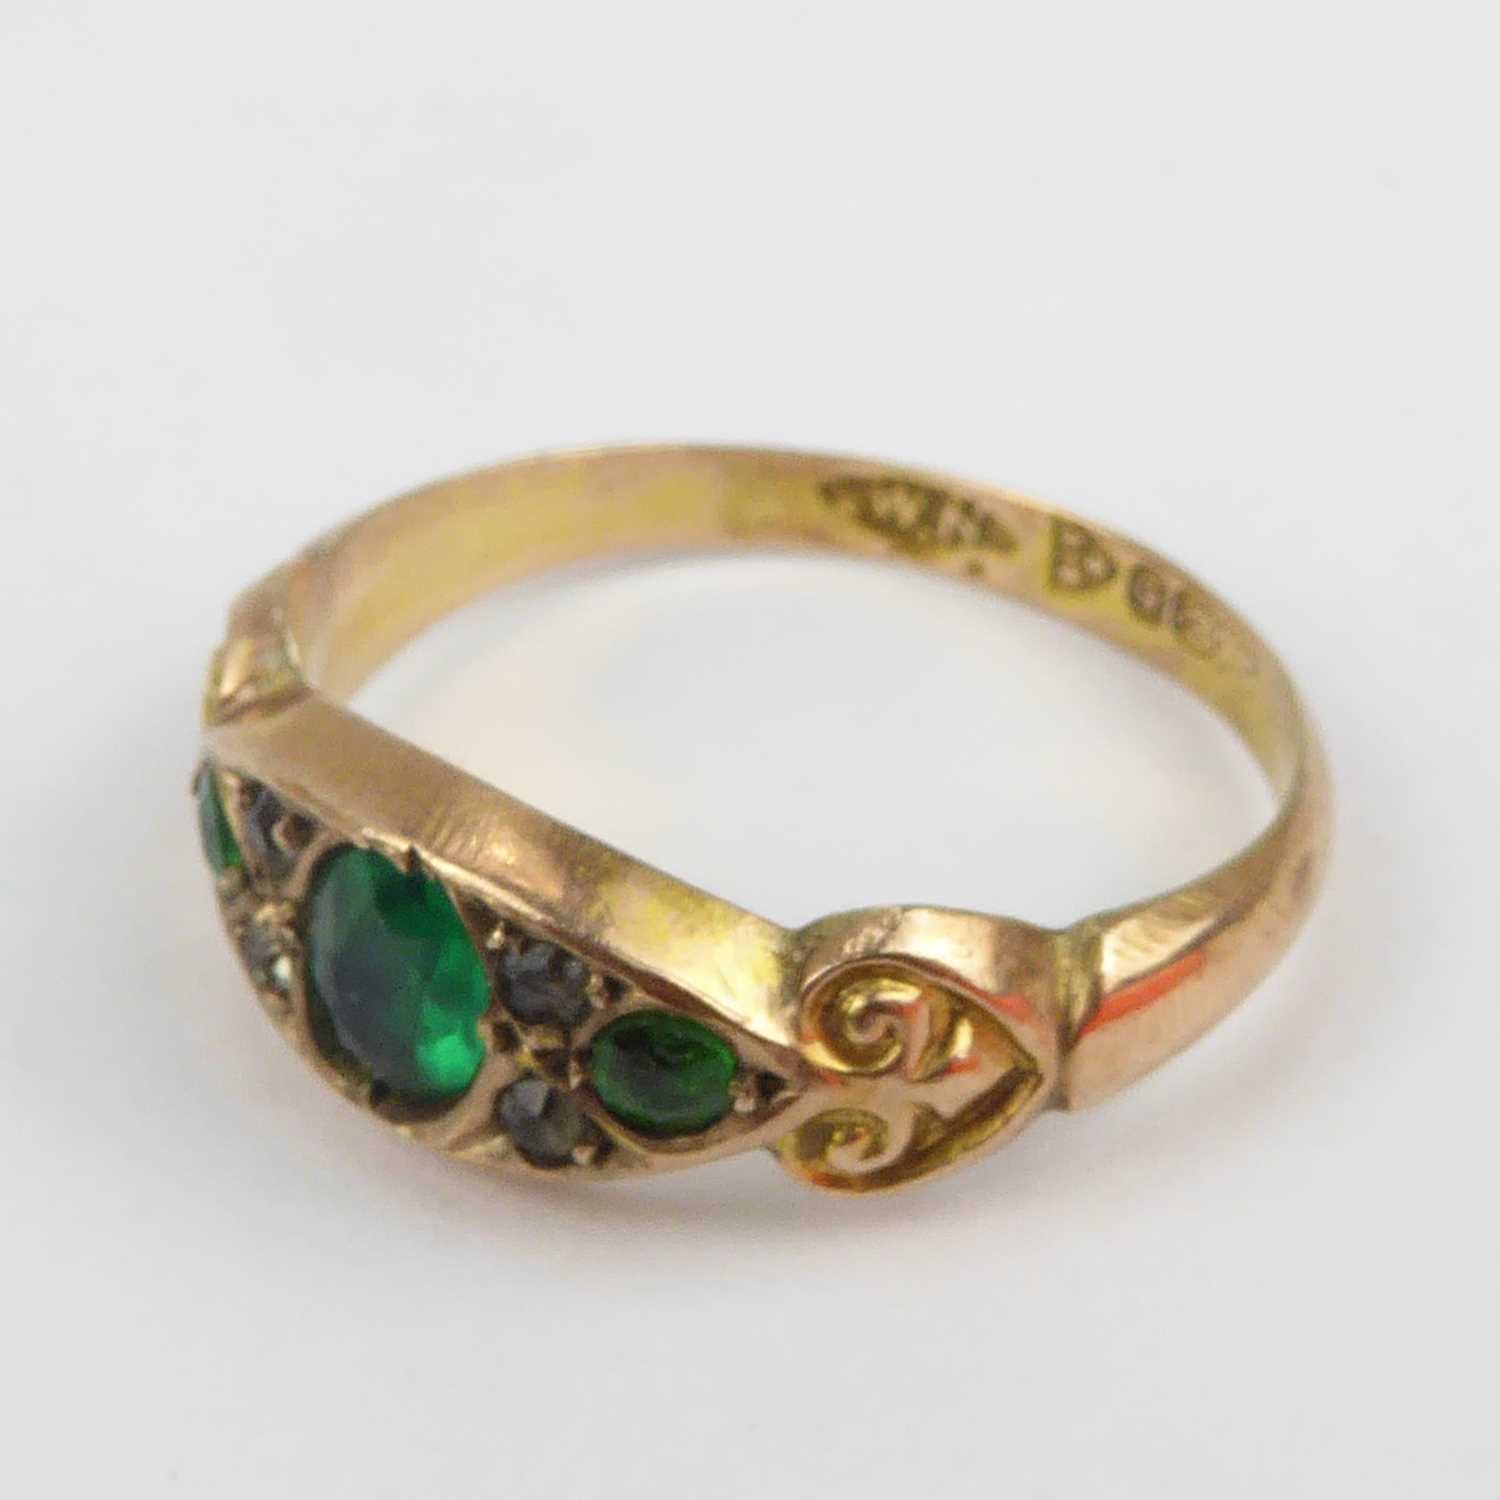 A Victorian 9ct gold green stone and tiny rose cut diamond ring, size O, approx. 1.4g. - Image 2 of 3